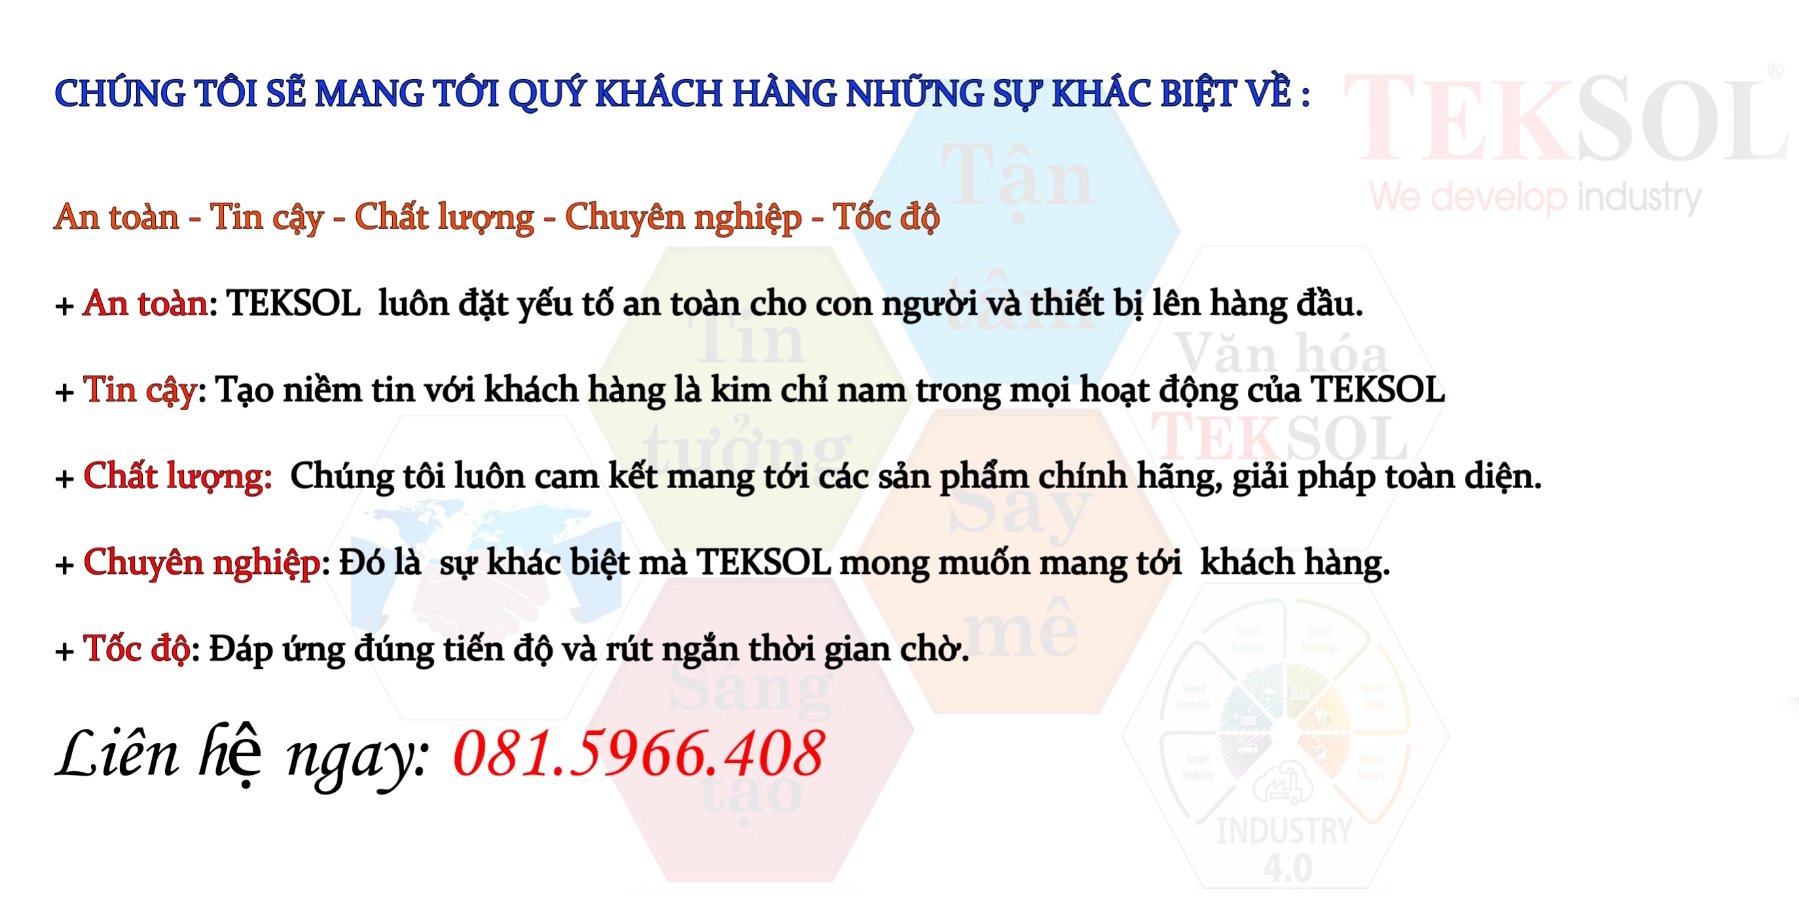 an toan tin cay chat luong